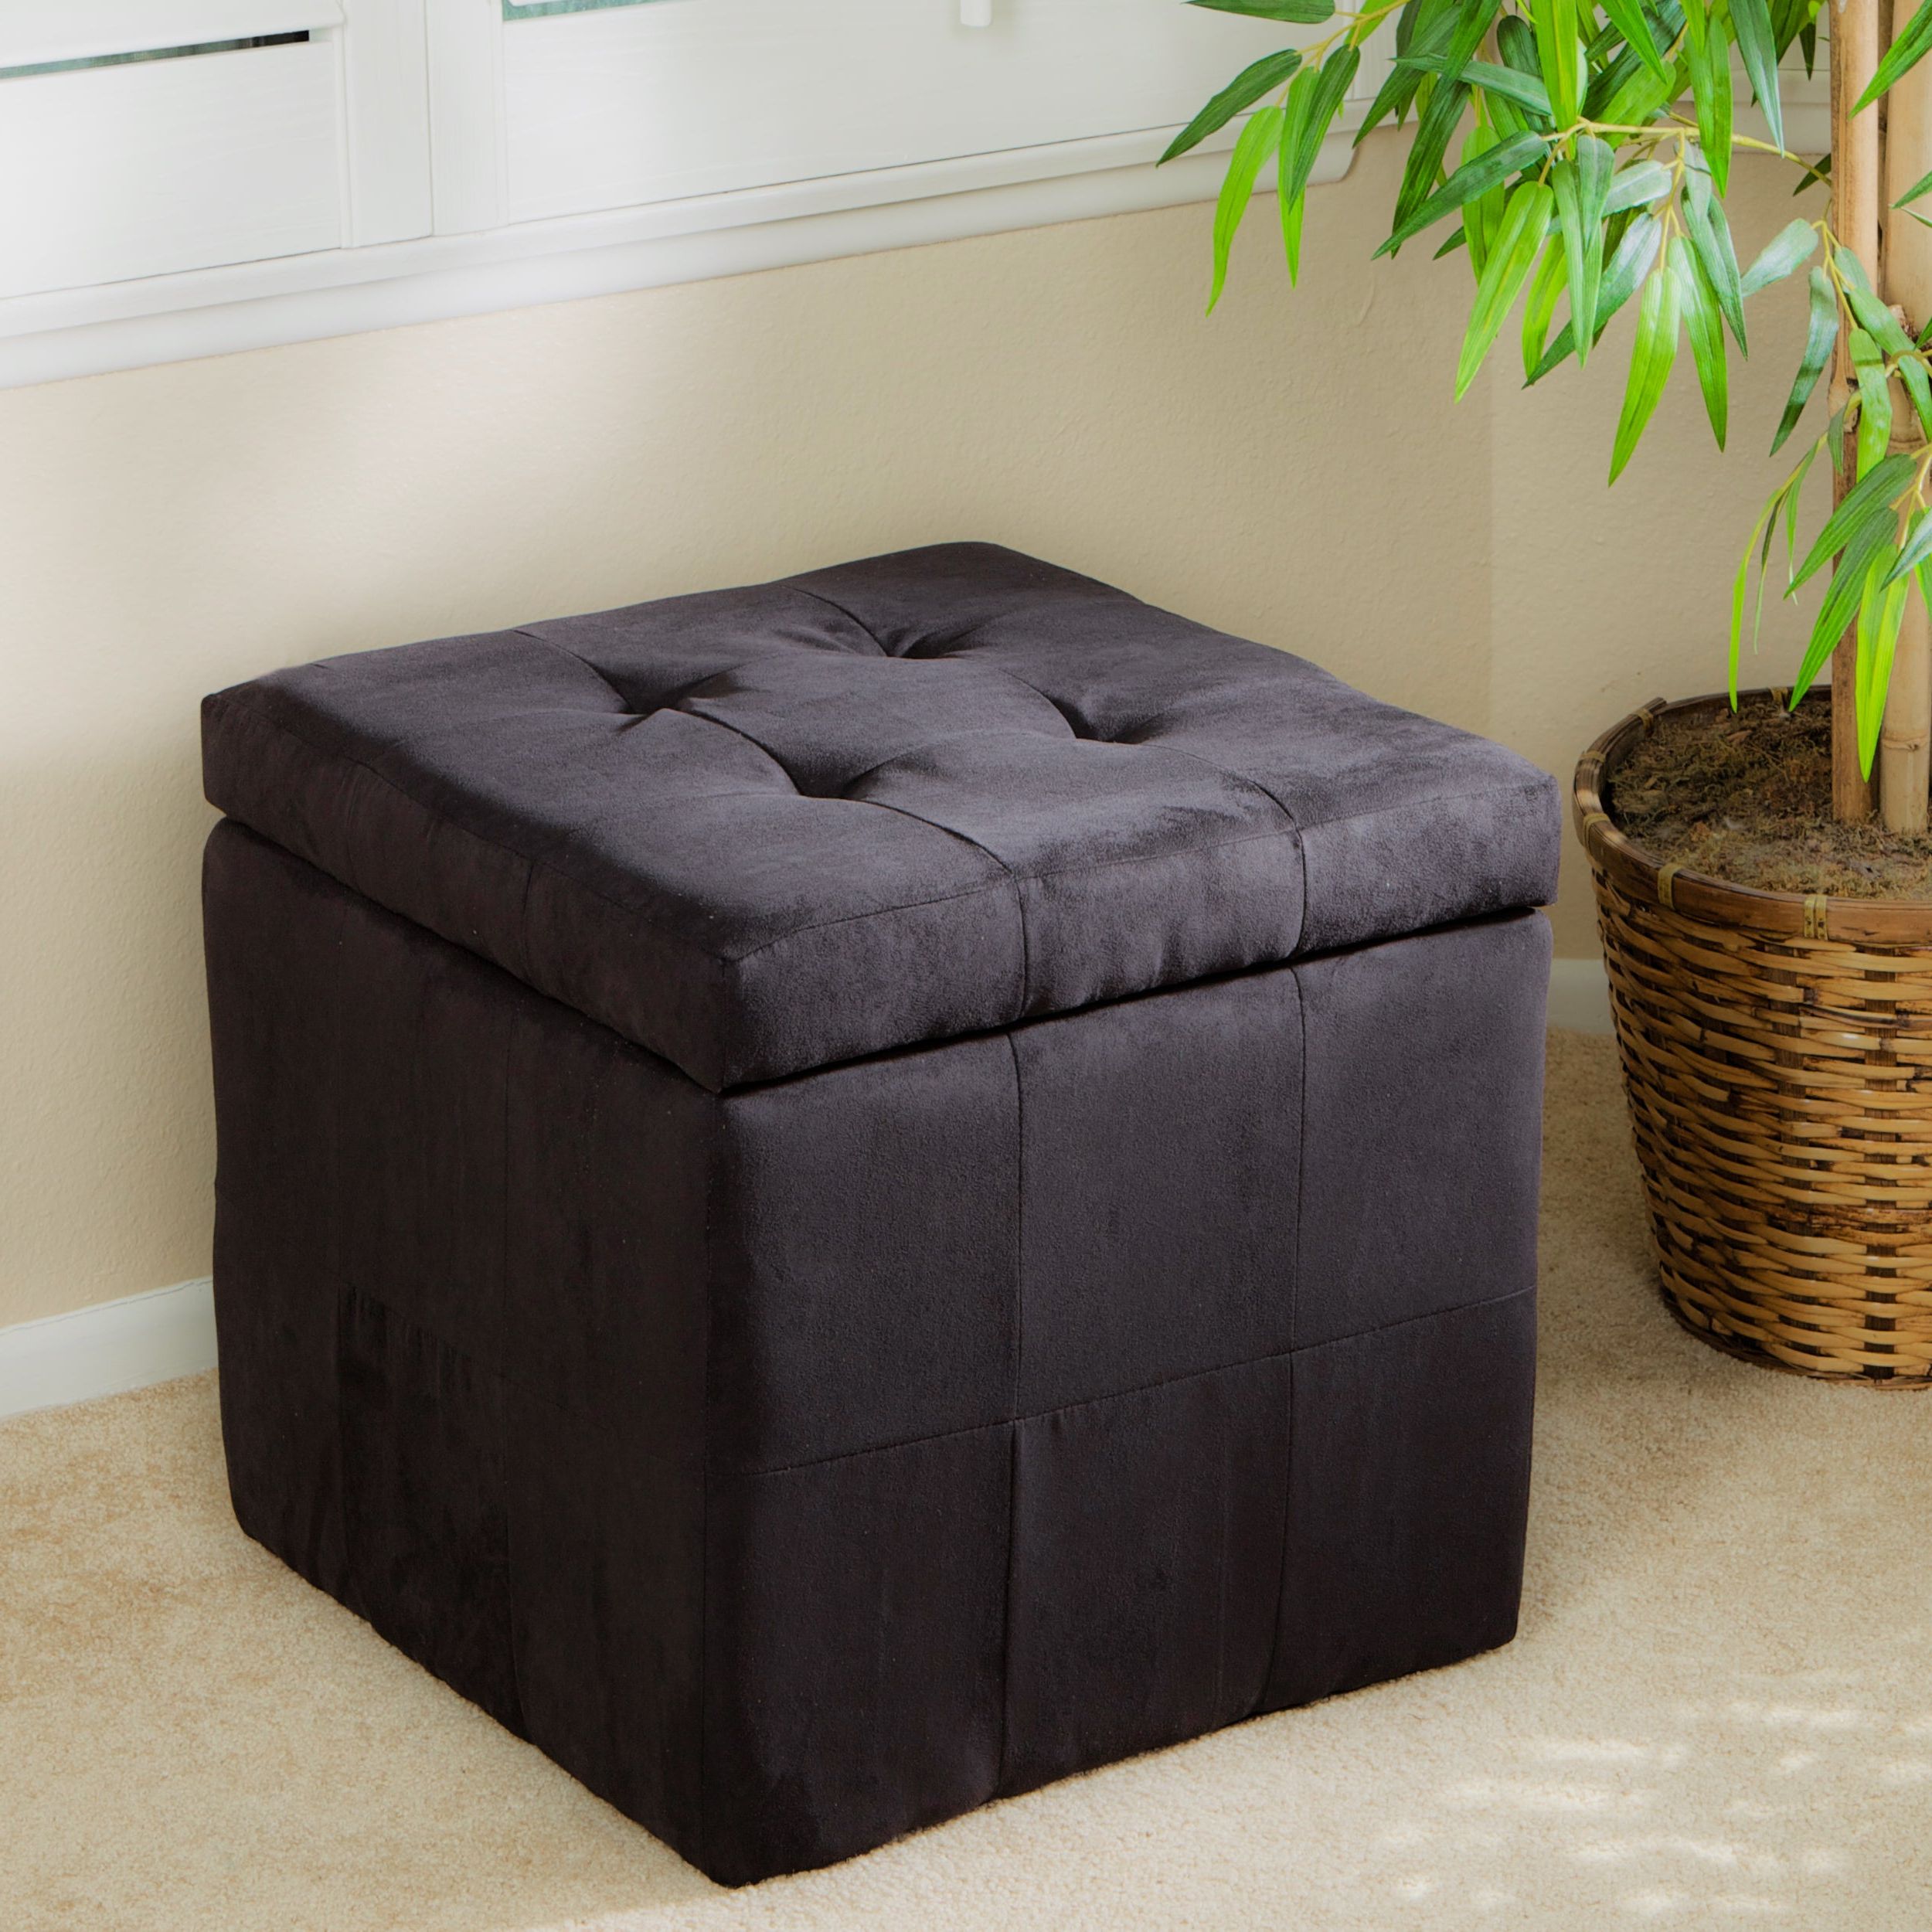 Fabric Tufted Round Storage Ottomans In Trendy Tufted Black Fabric Storage Cube Ottoman – 13915122 – Overstock (View 6 of 10)